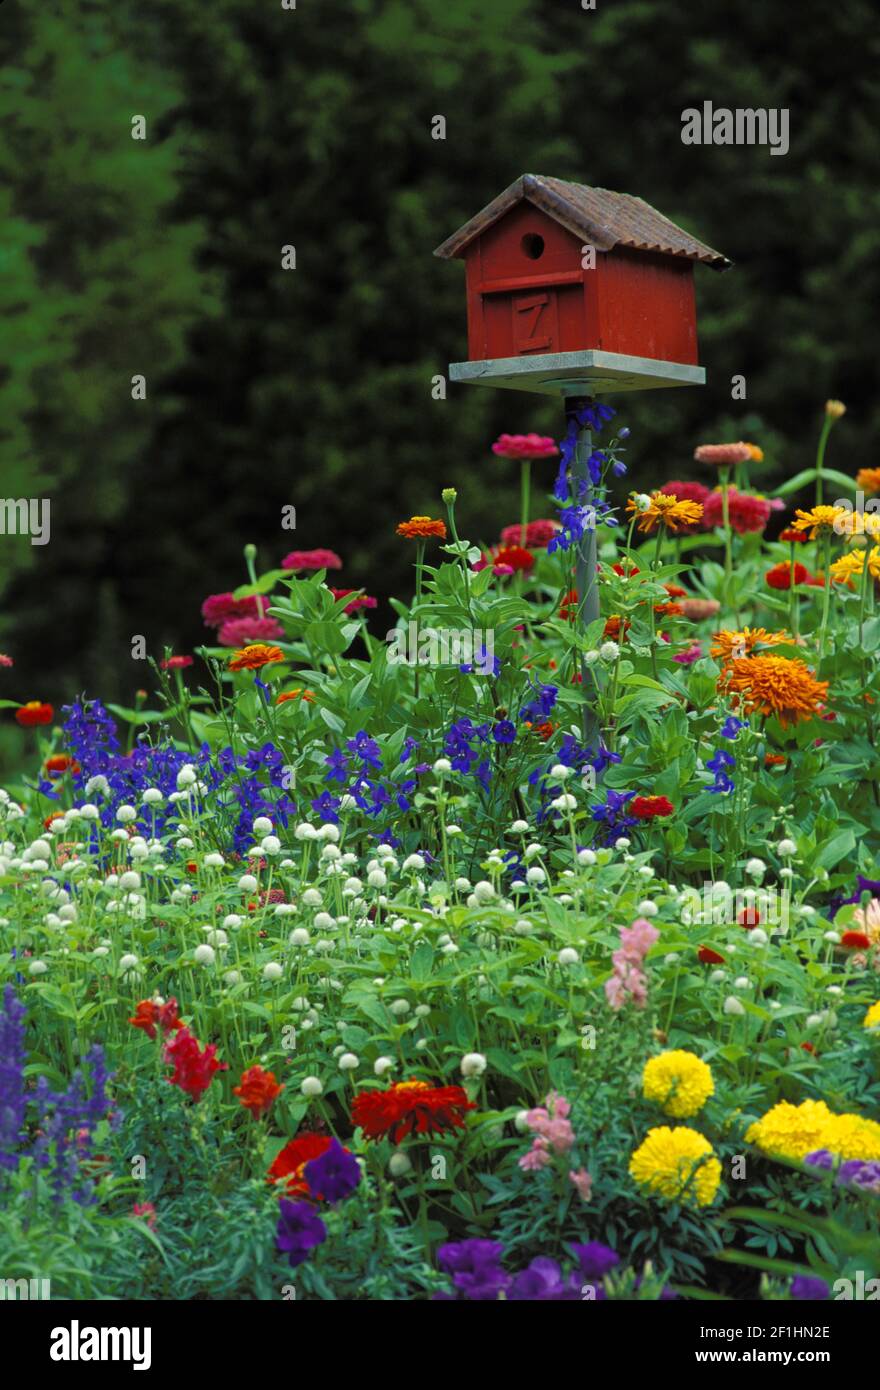 Red barn birdhouse or bird box in the gaudy multicolored summer-blooming garden with zinnias and lilies Missouri, USA Stock Photo